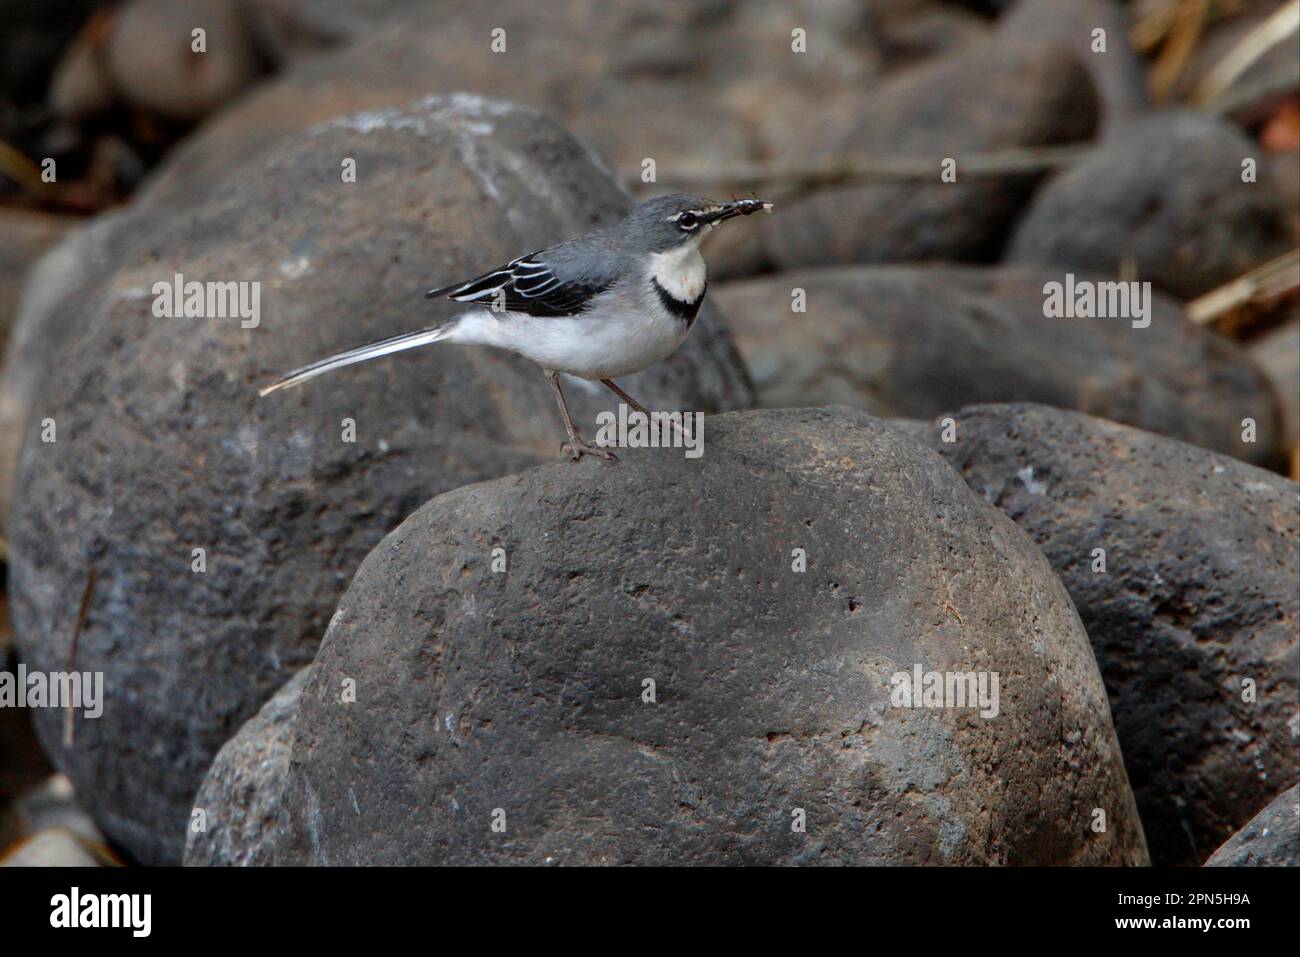 Mountain wagtail (Motacilla clara), Long-tailed wagtails, Songbirds, Animals, Birds, Mountain wagtail adult, standing on rock, with food in beak Stock Photo